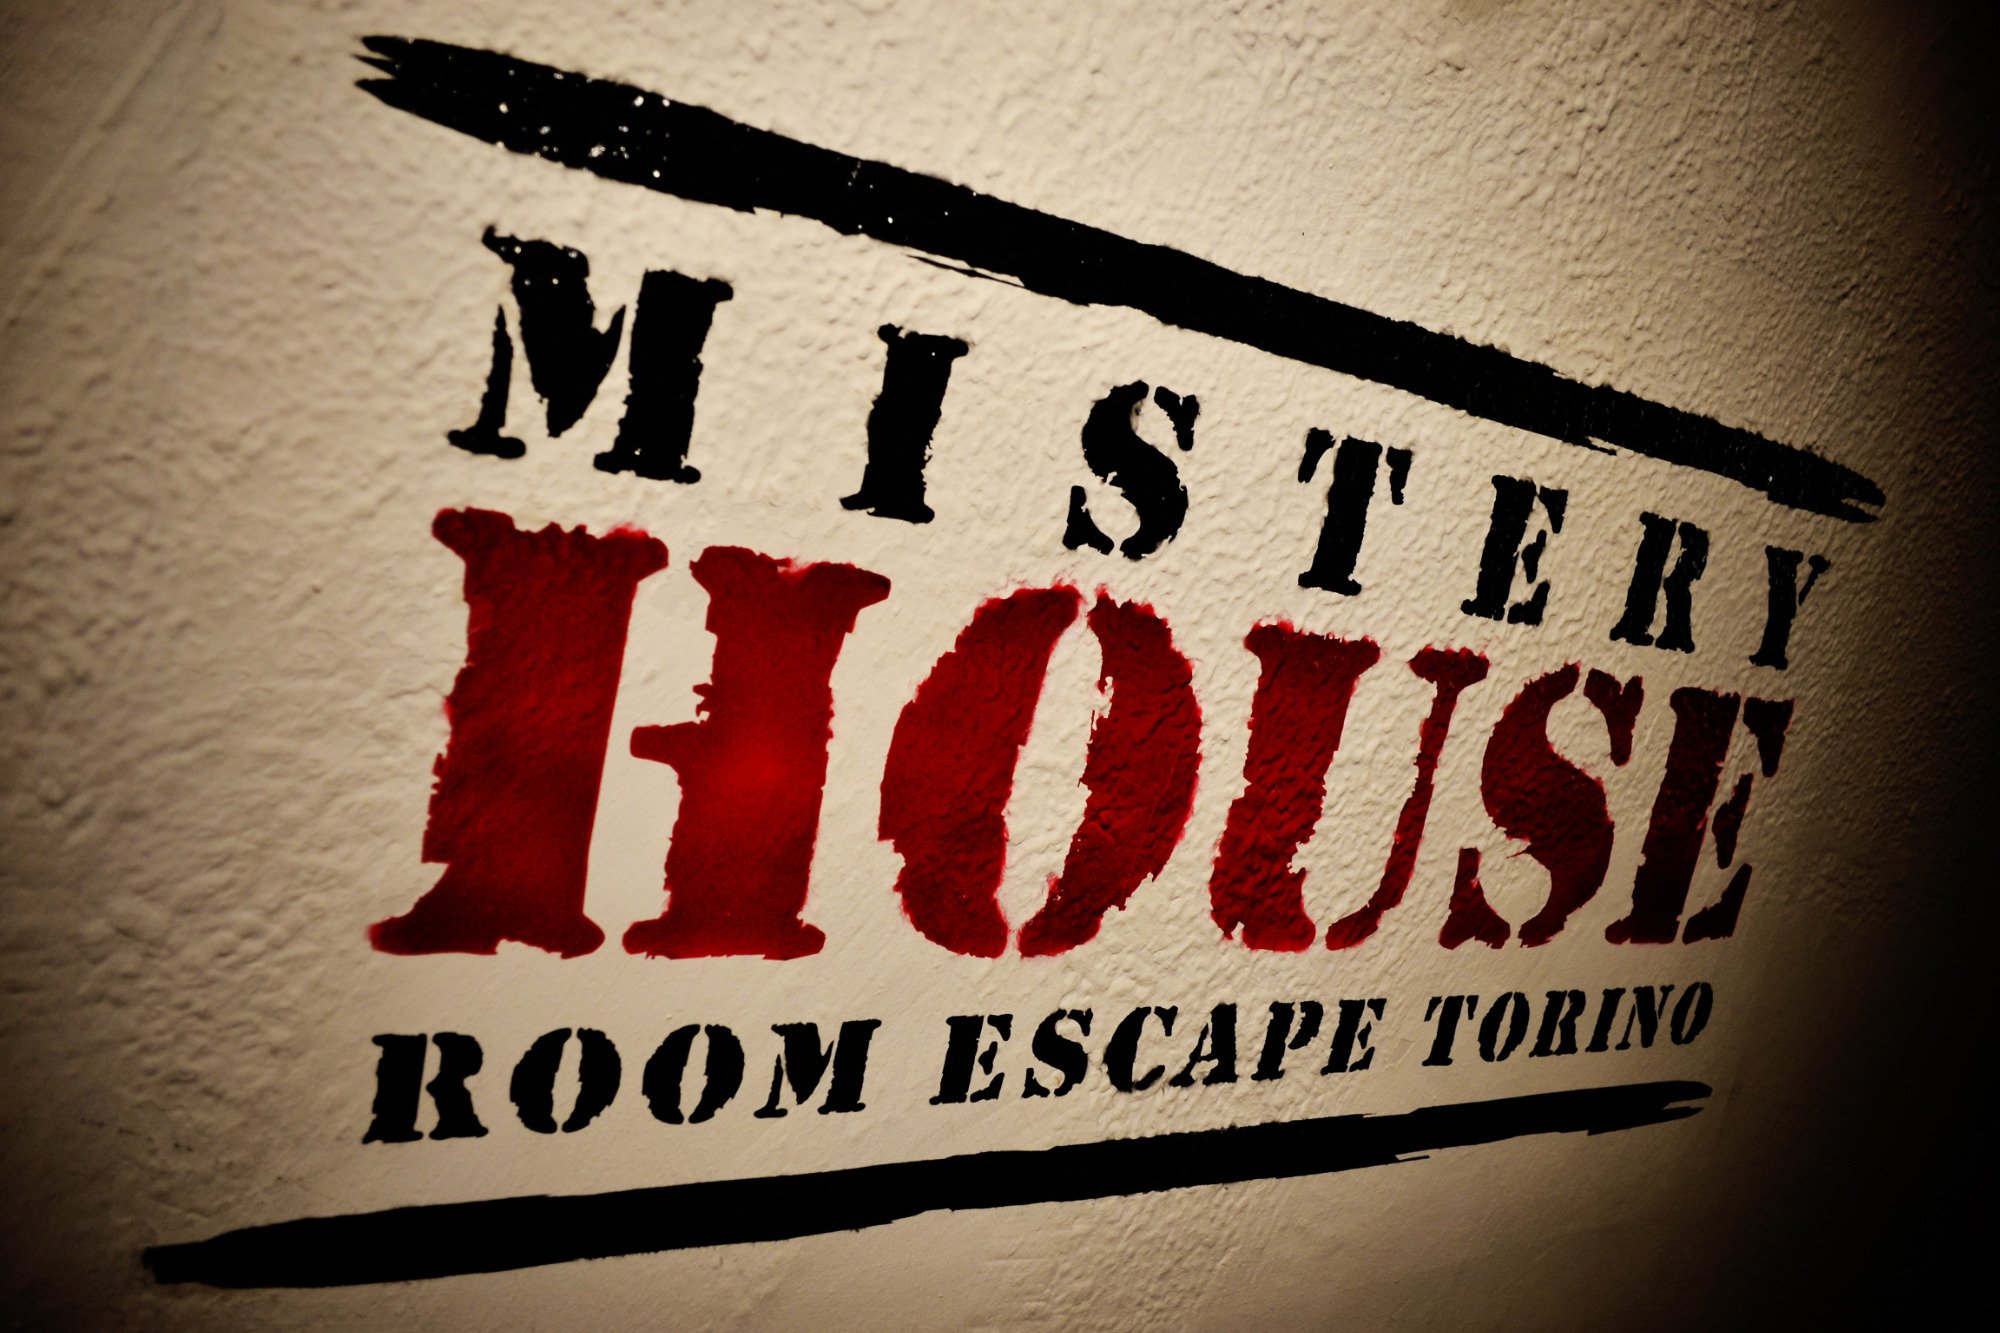 Mystery House Room Escape